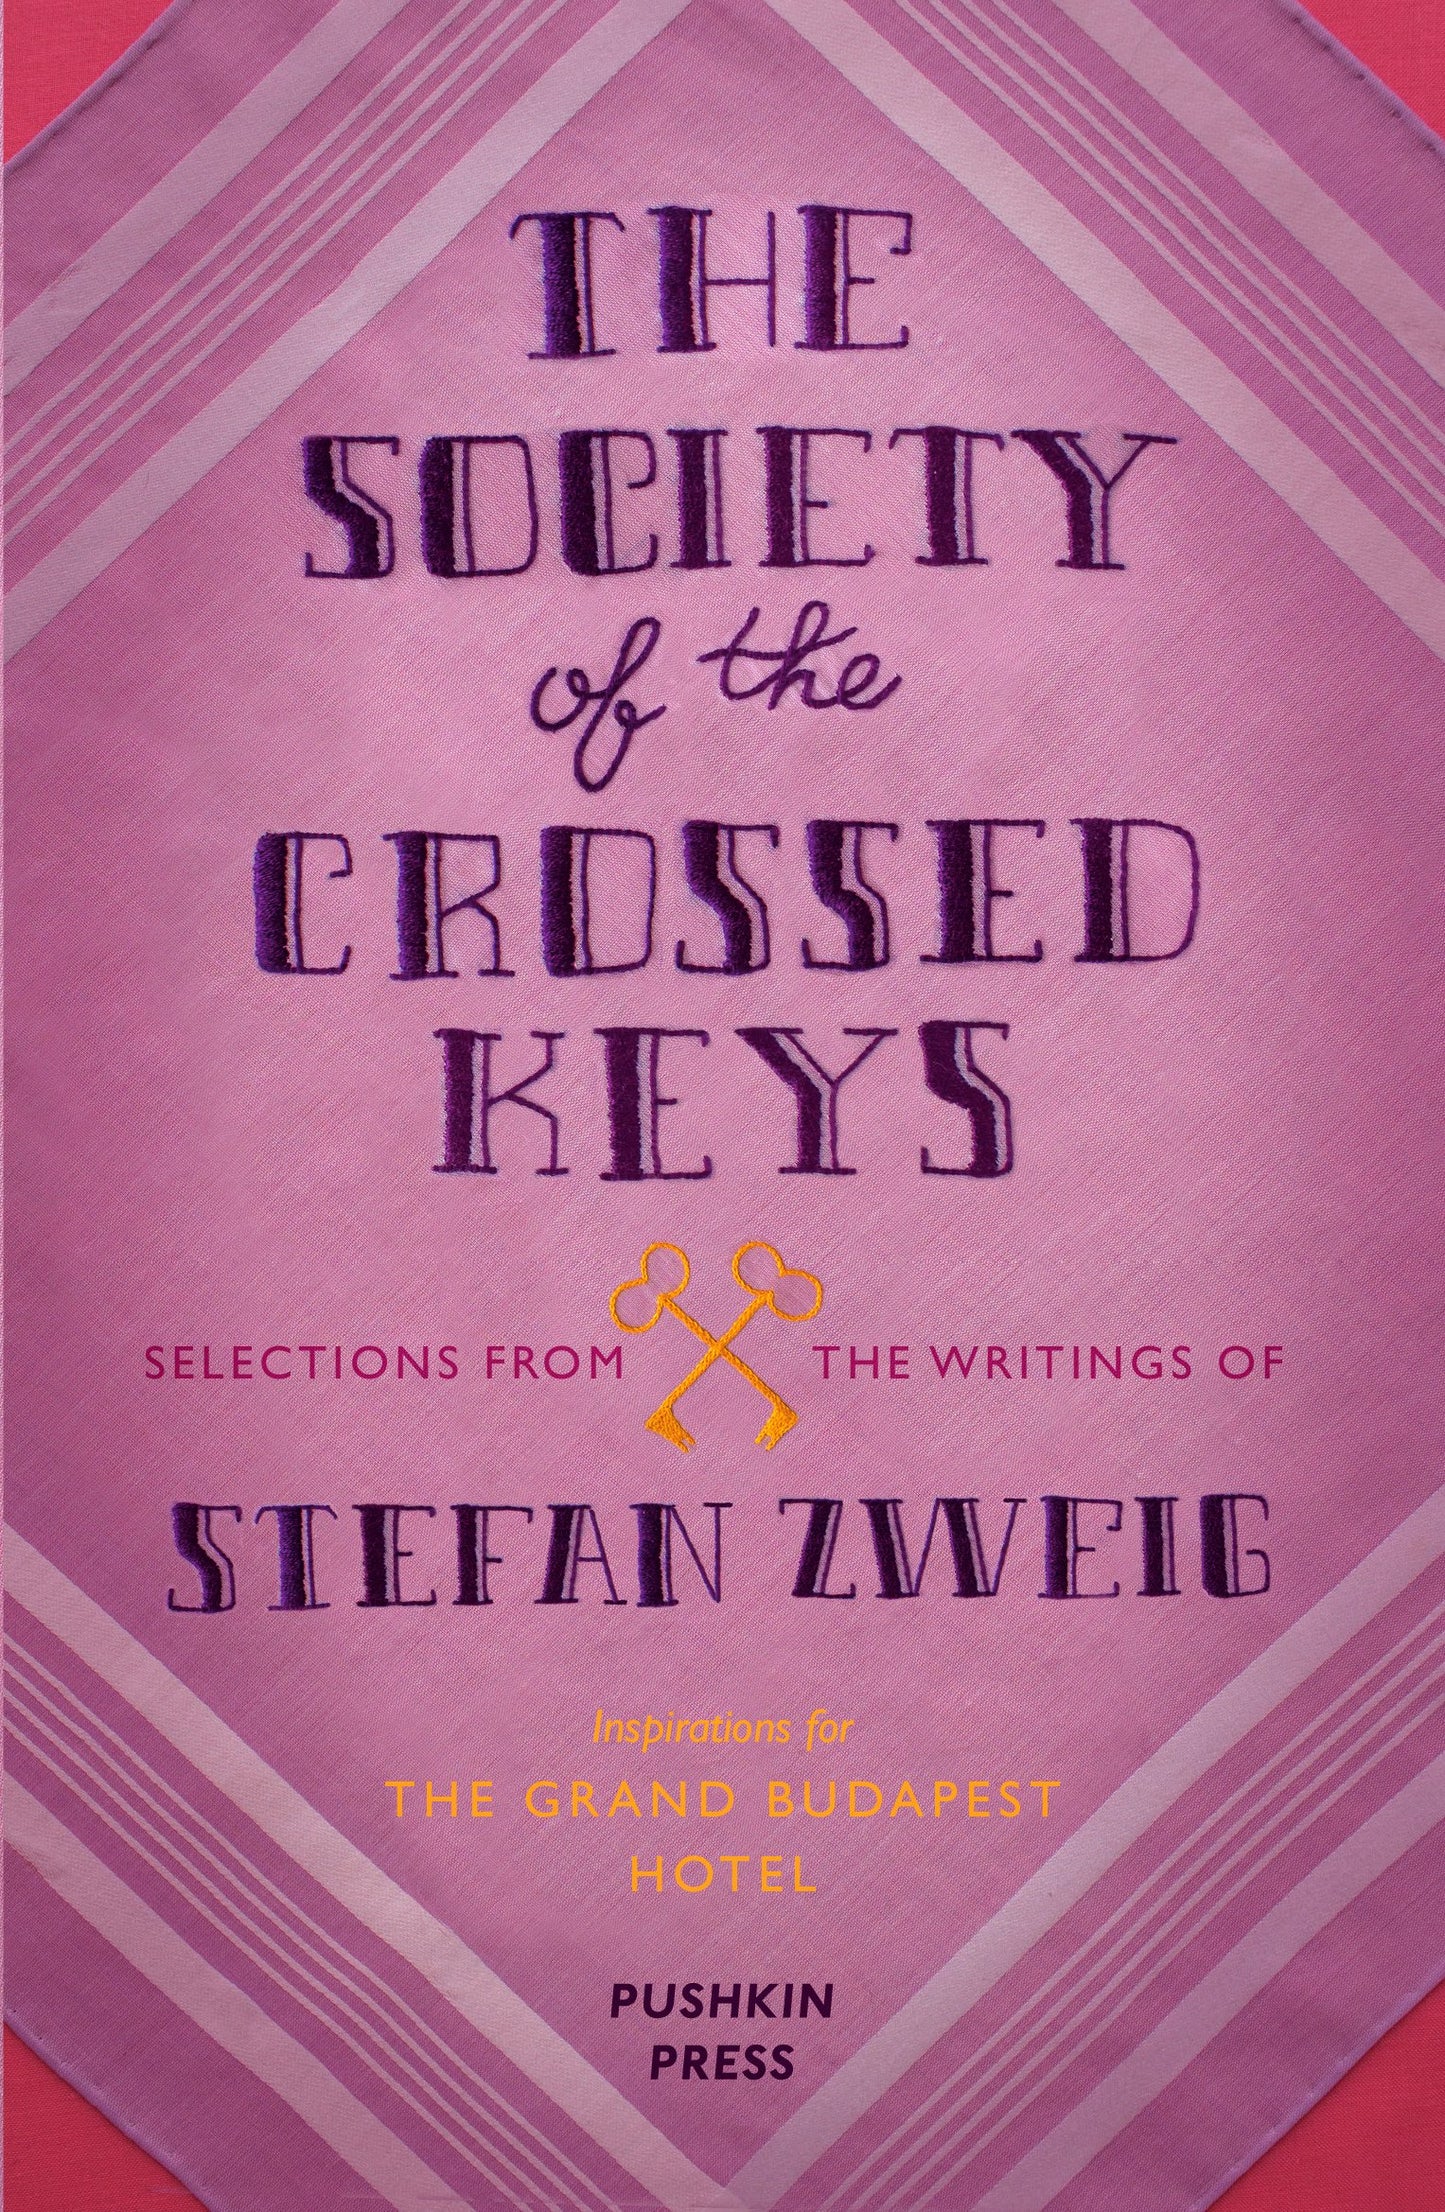 The Society of the Crossed Keys: Selections from the Writings of Stefan Zweig